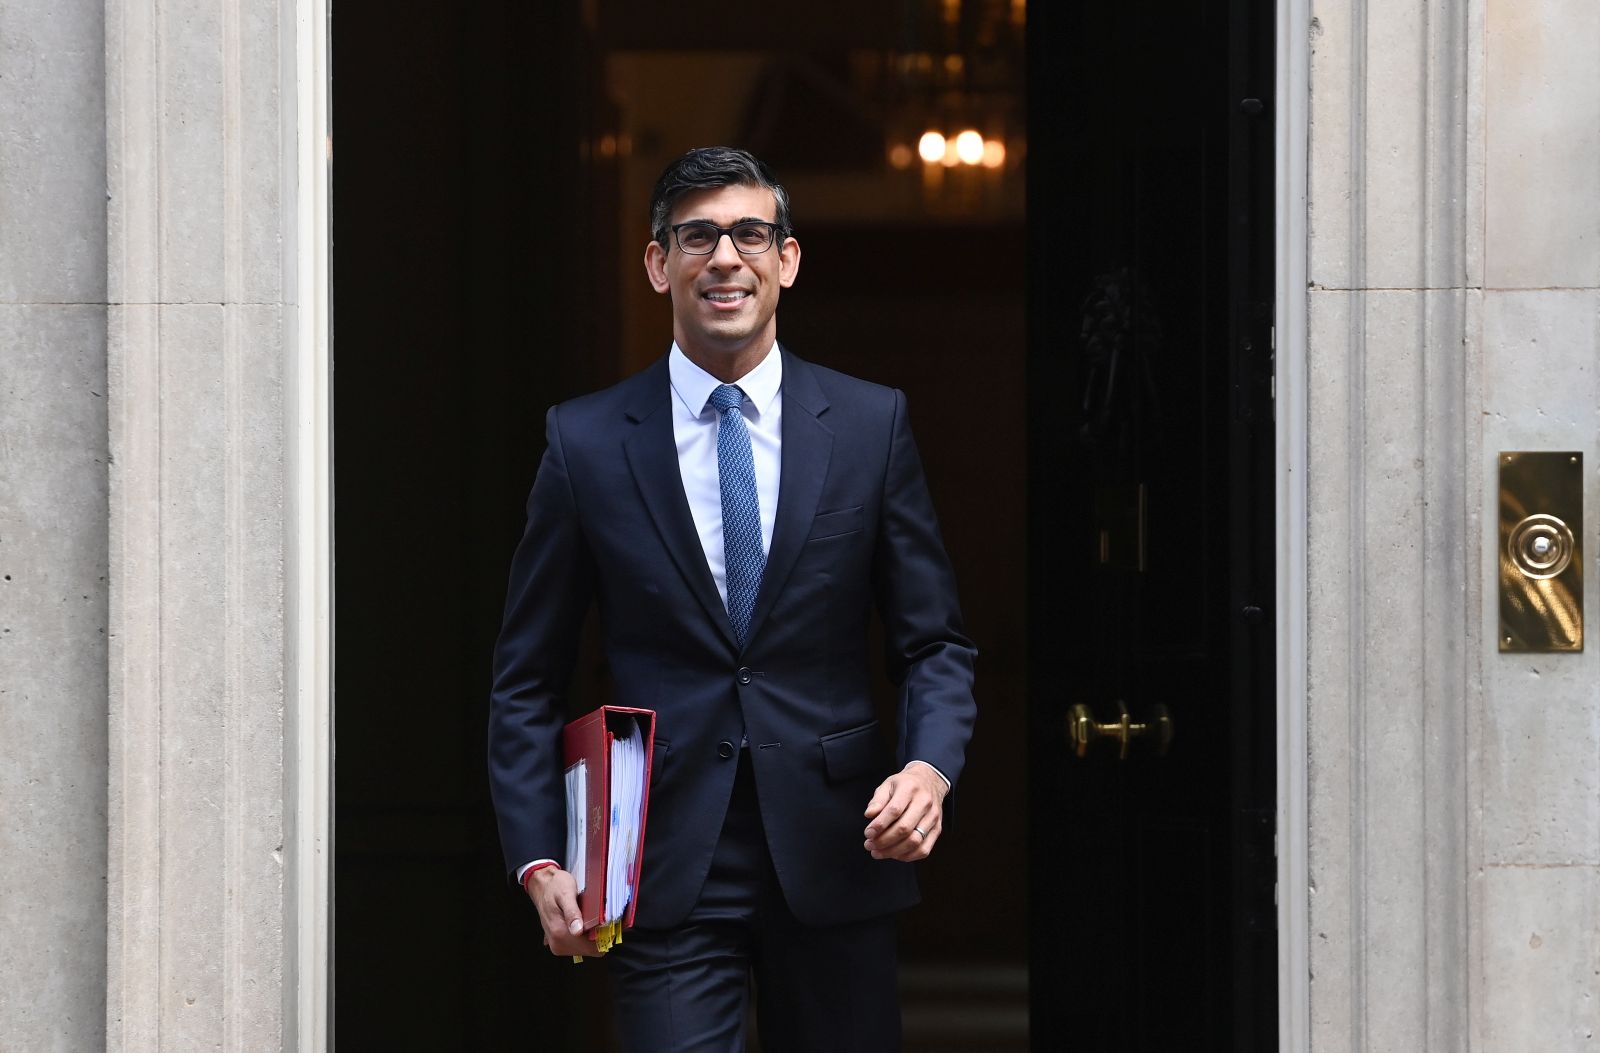 epa10536687 British Prime Minister Rishi Sunak departs 10 Downing Street in London, Britain, 22 February  2023. Sunak will face off with Labour leader Keir Starmer during Prime Ministers Questions at parliament 22 March.  EPA/ANDY RAIN